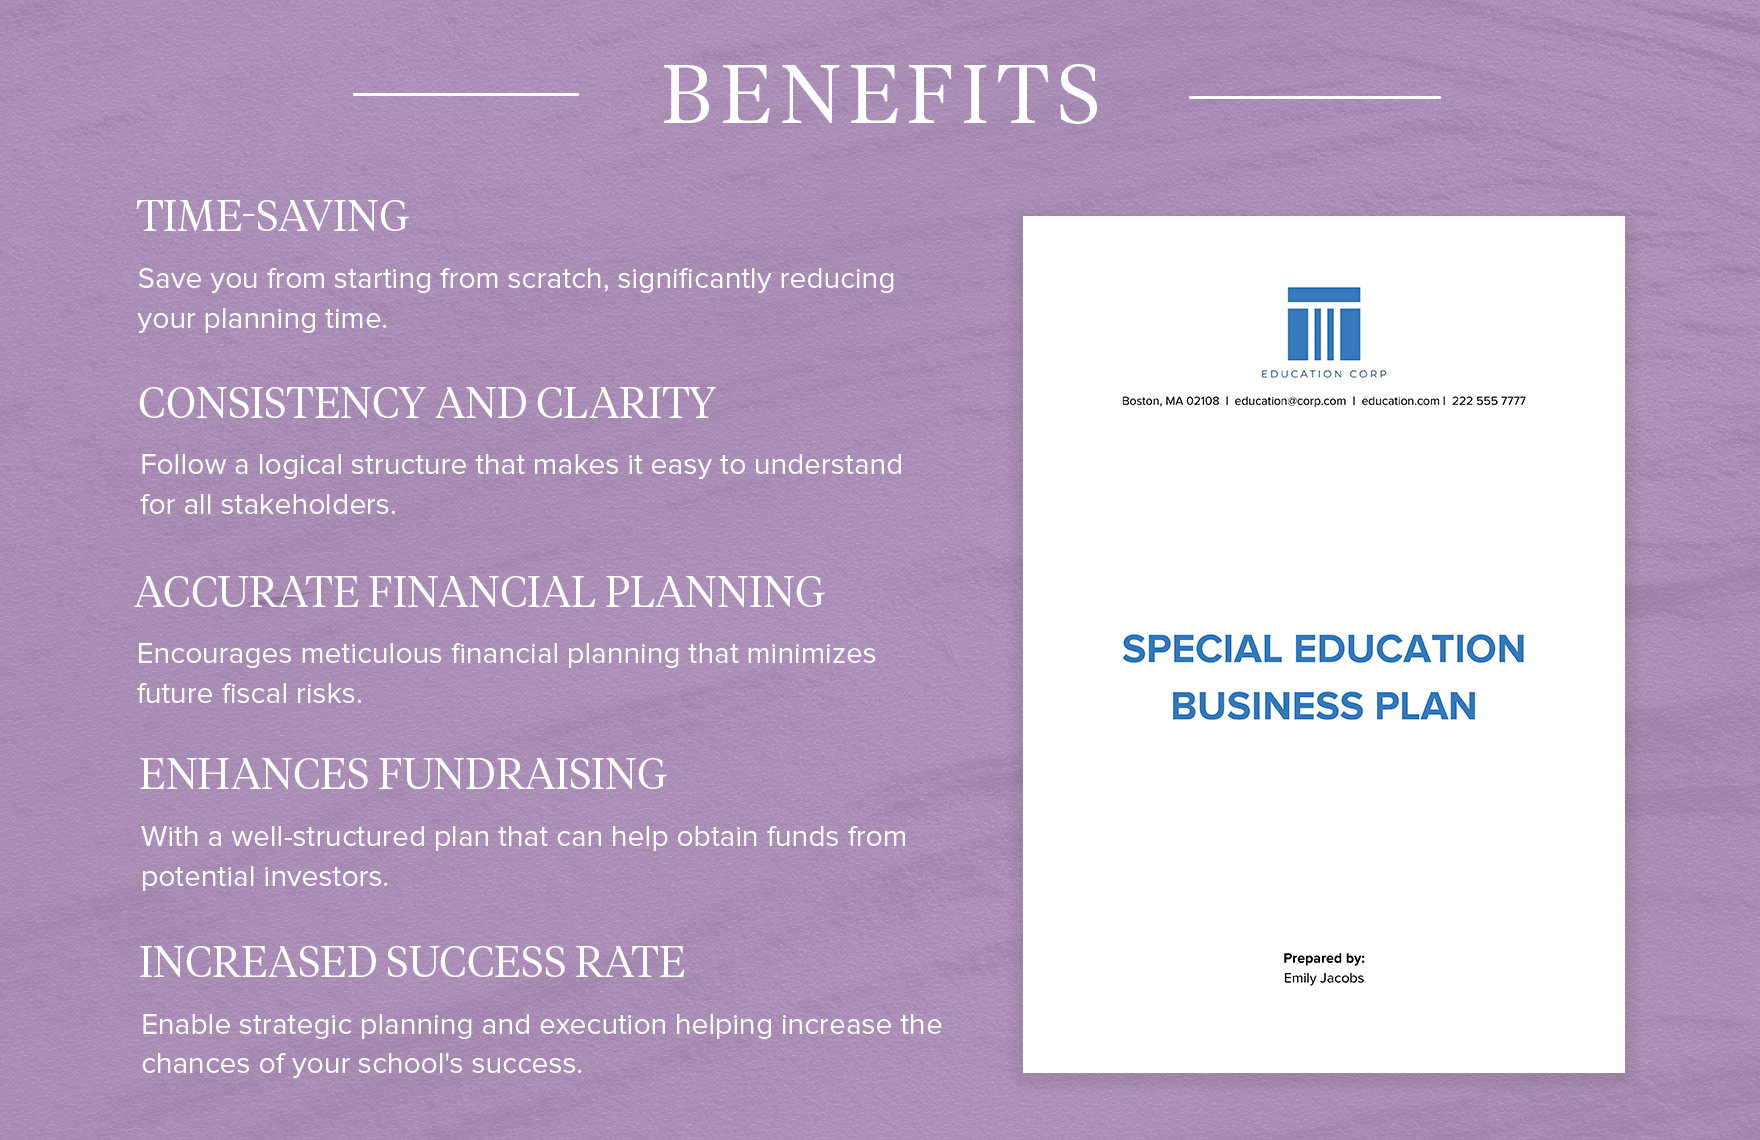 Special Education Business Plan Template